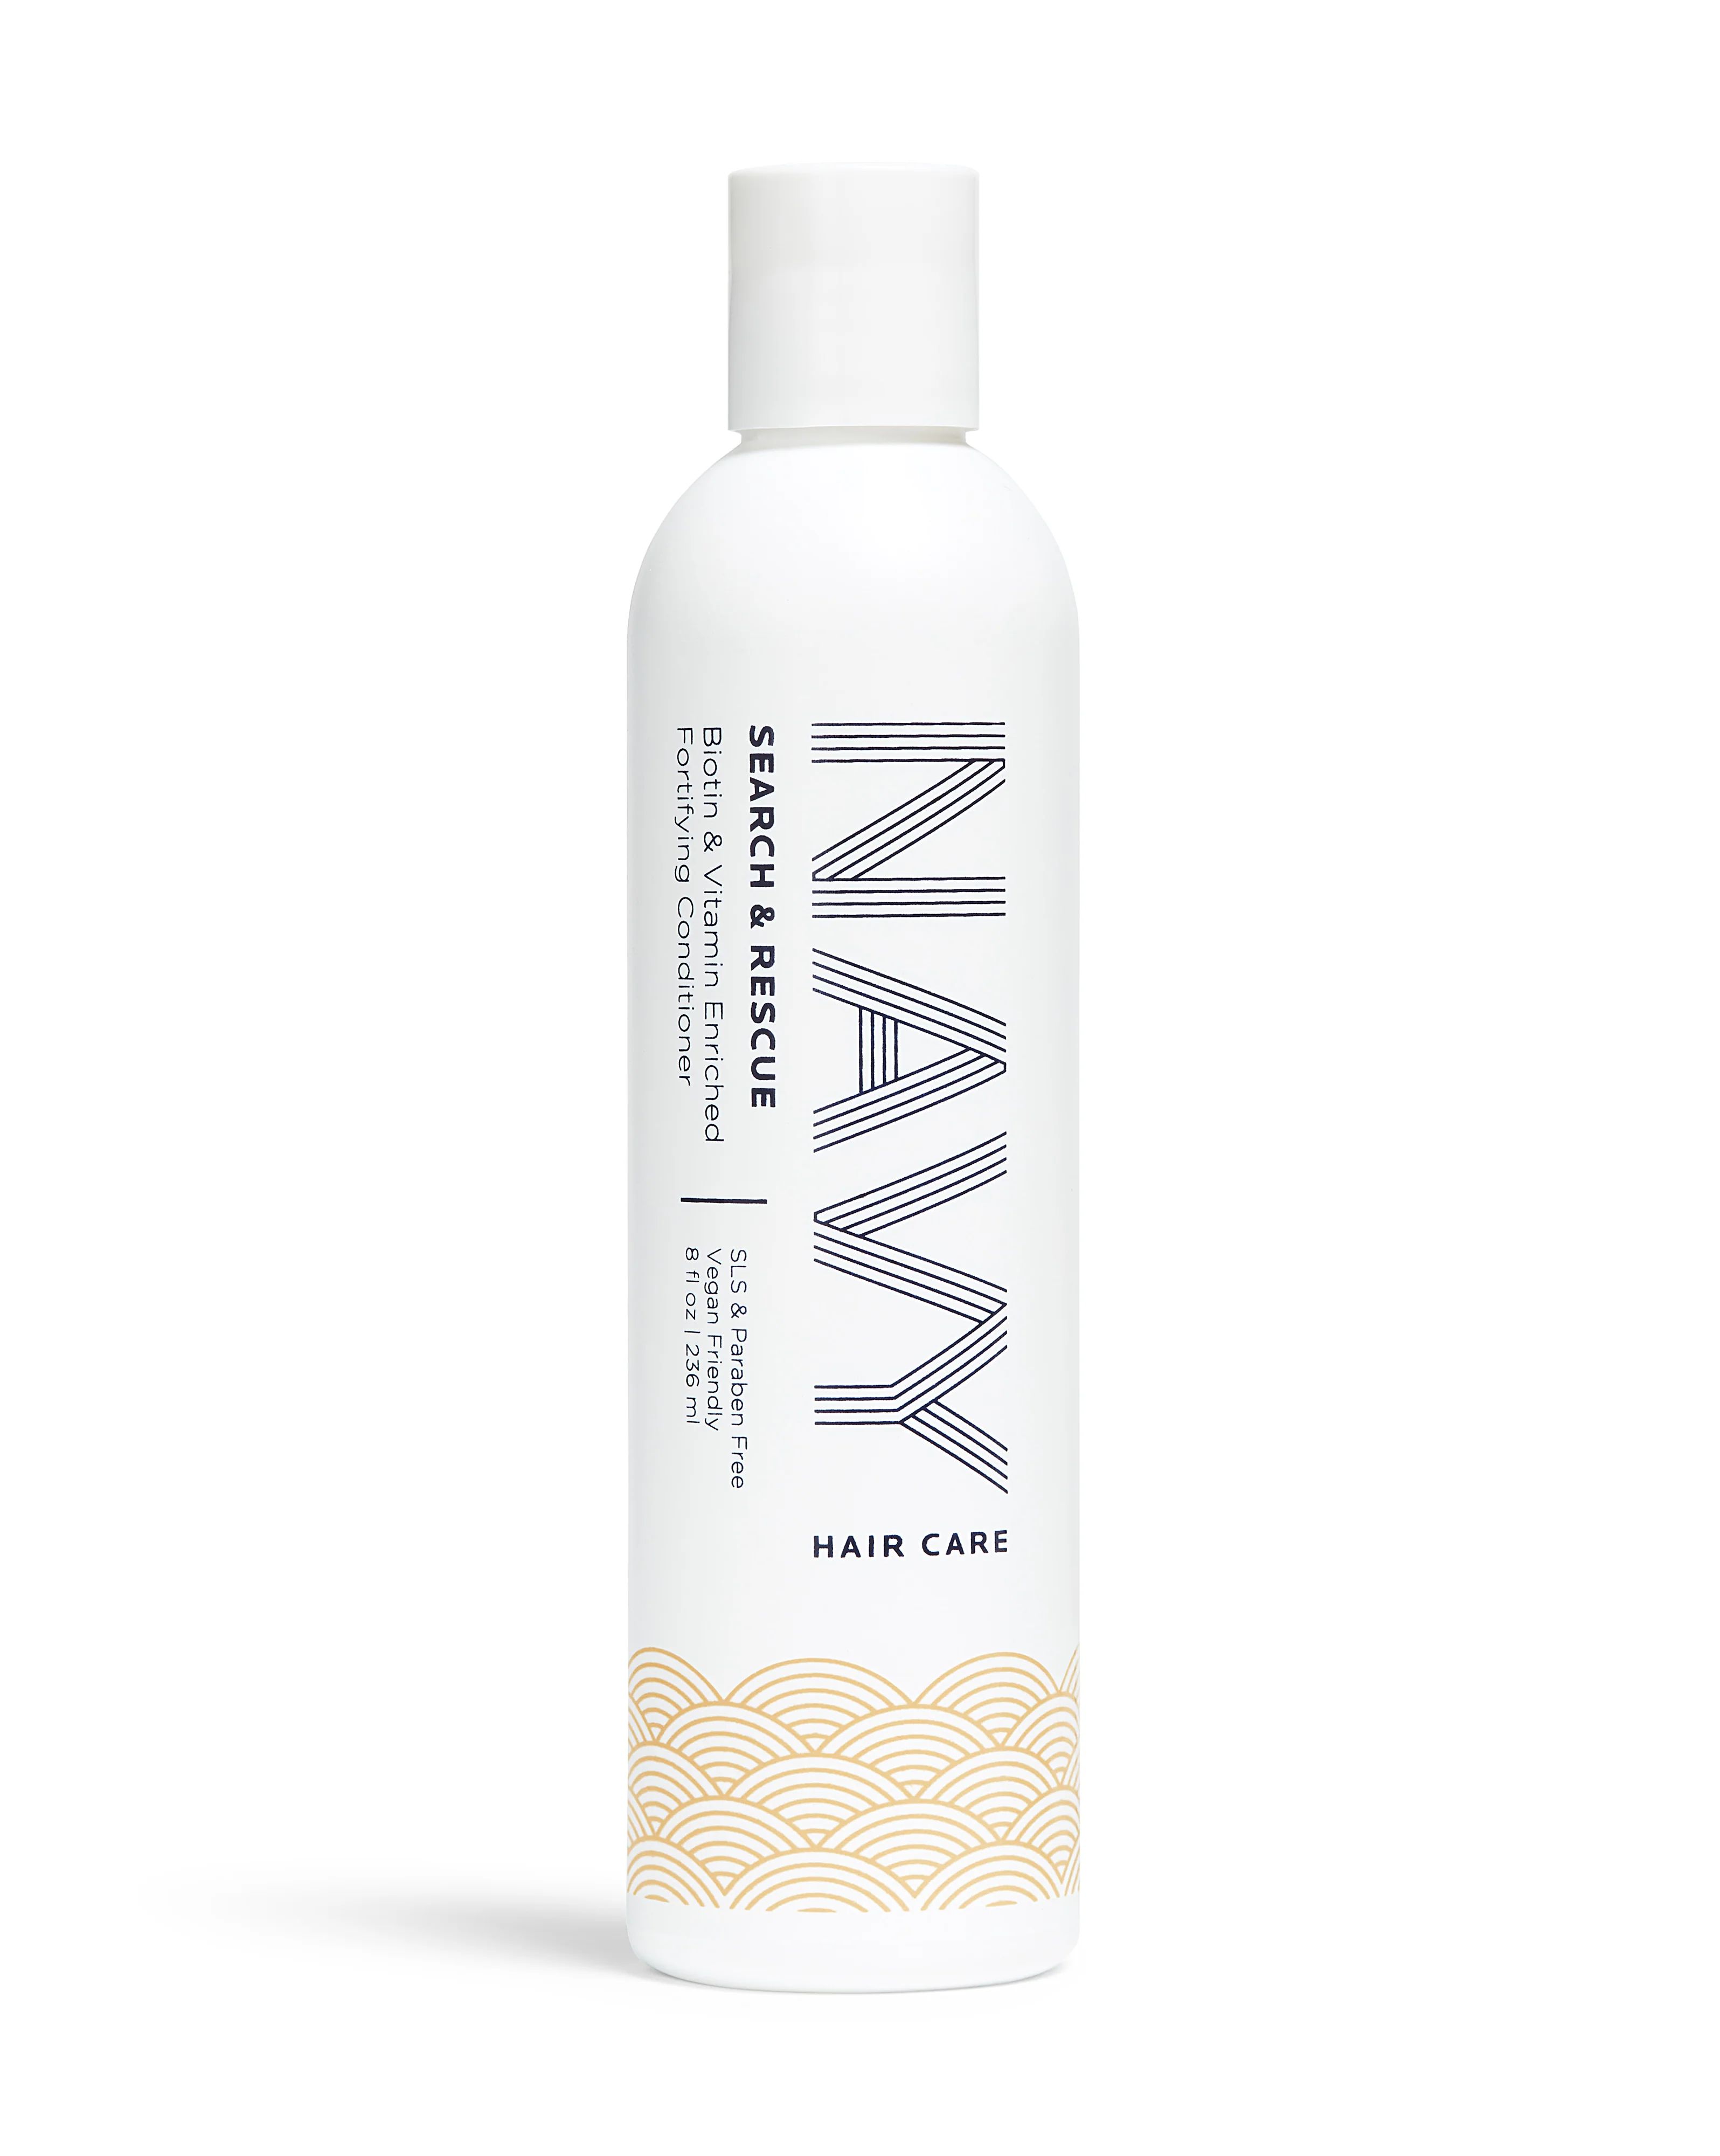 Search & Rescue Conditioner | NAVY Hair Care